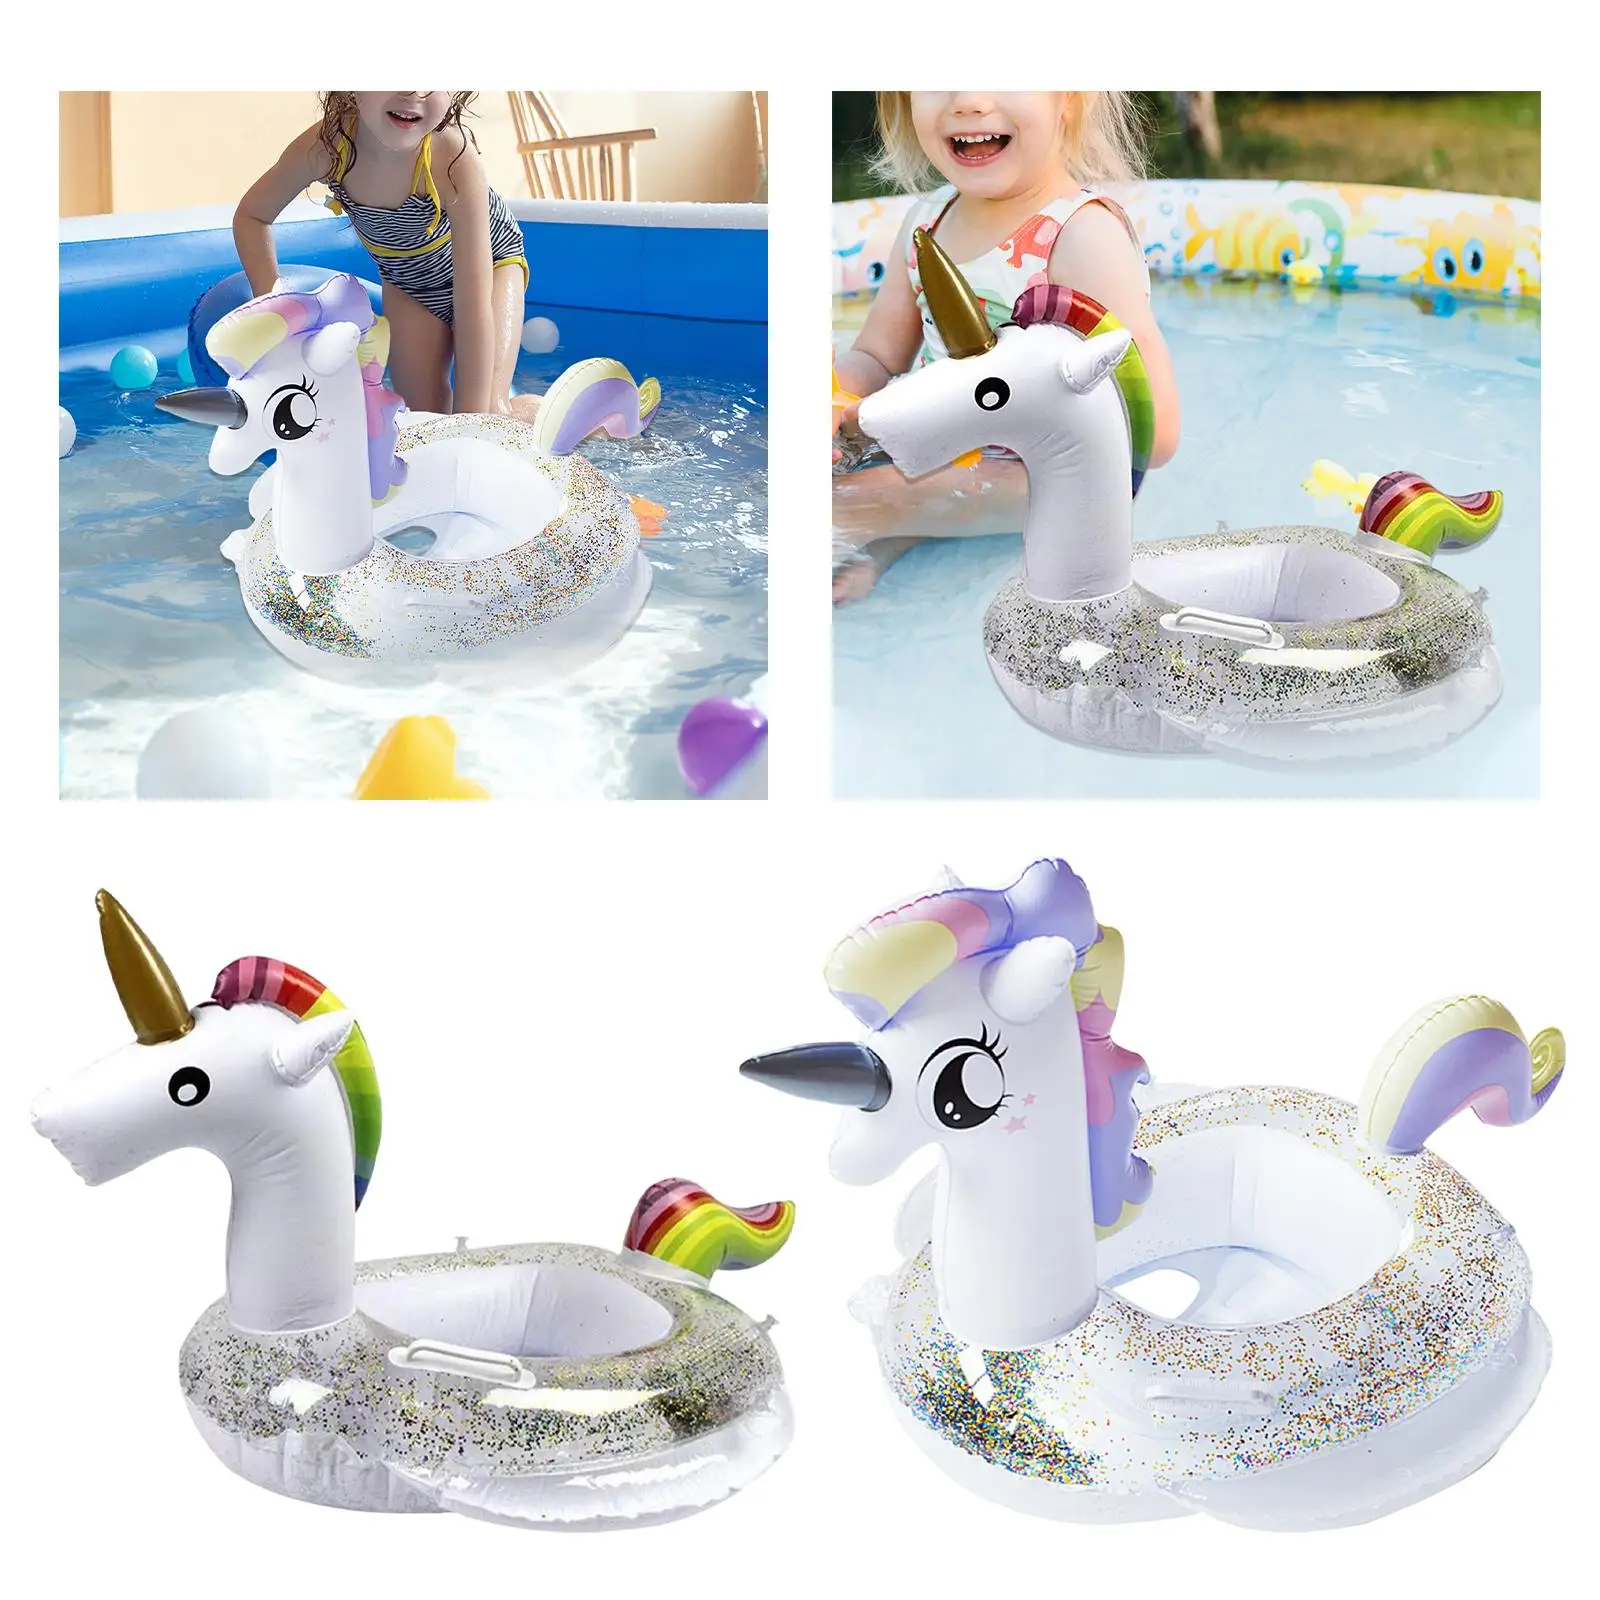 Kids Inflatable Pool Float Cute Swimming Seat for Outdoor Water Sports